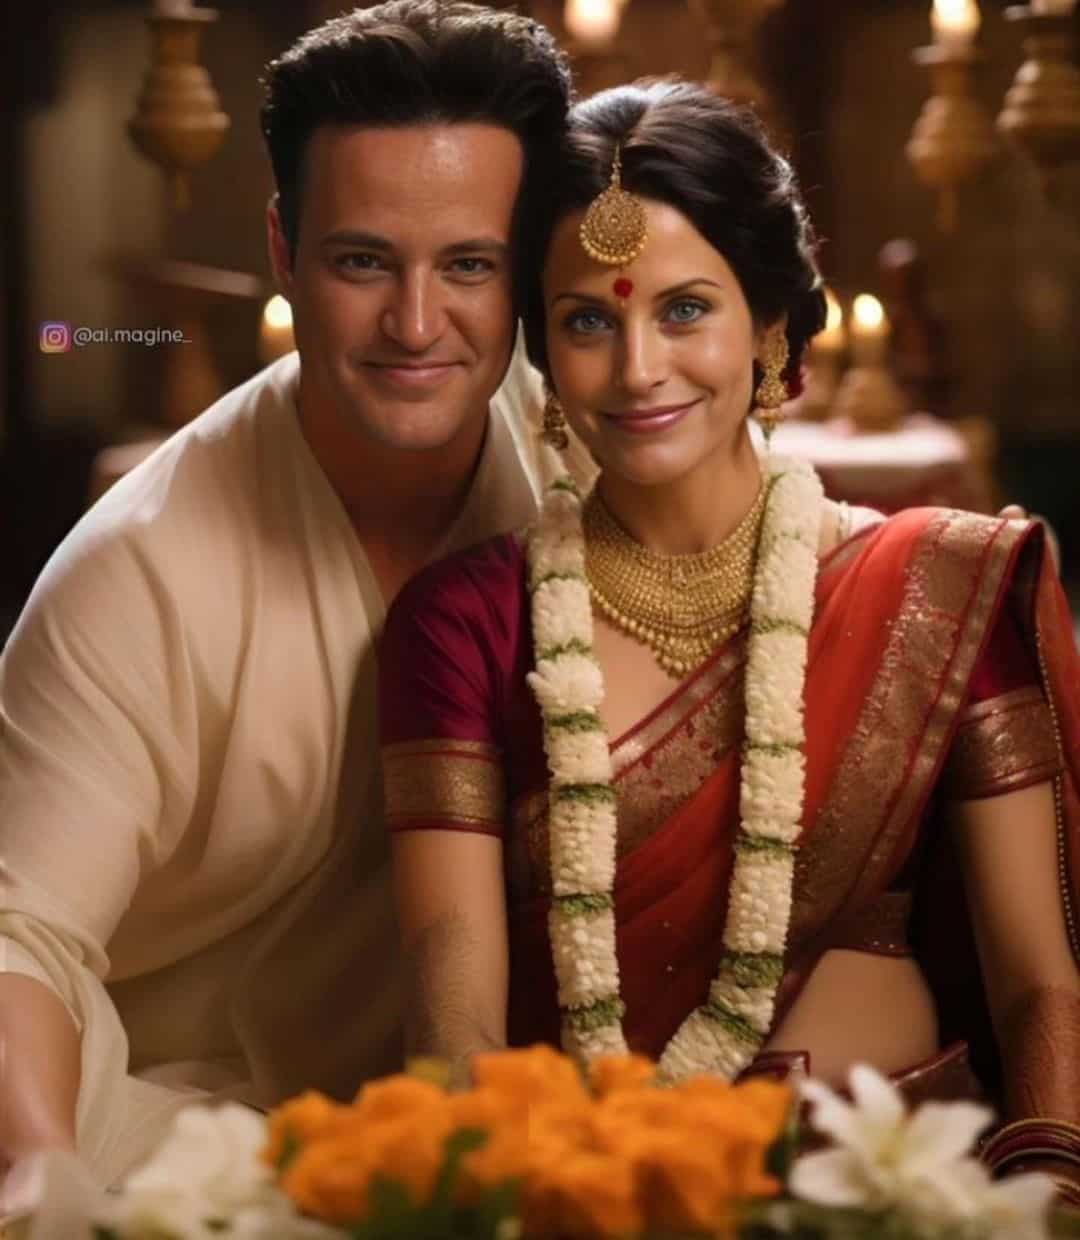 Chandler and Monica date and marry each other, the Indian way!